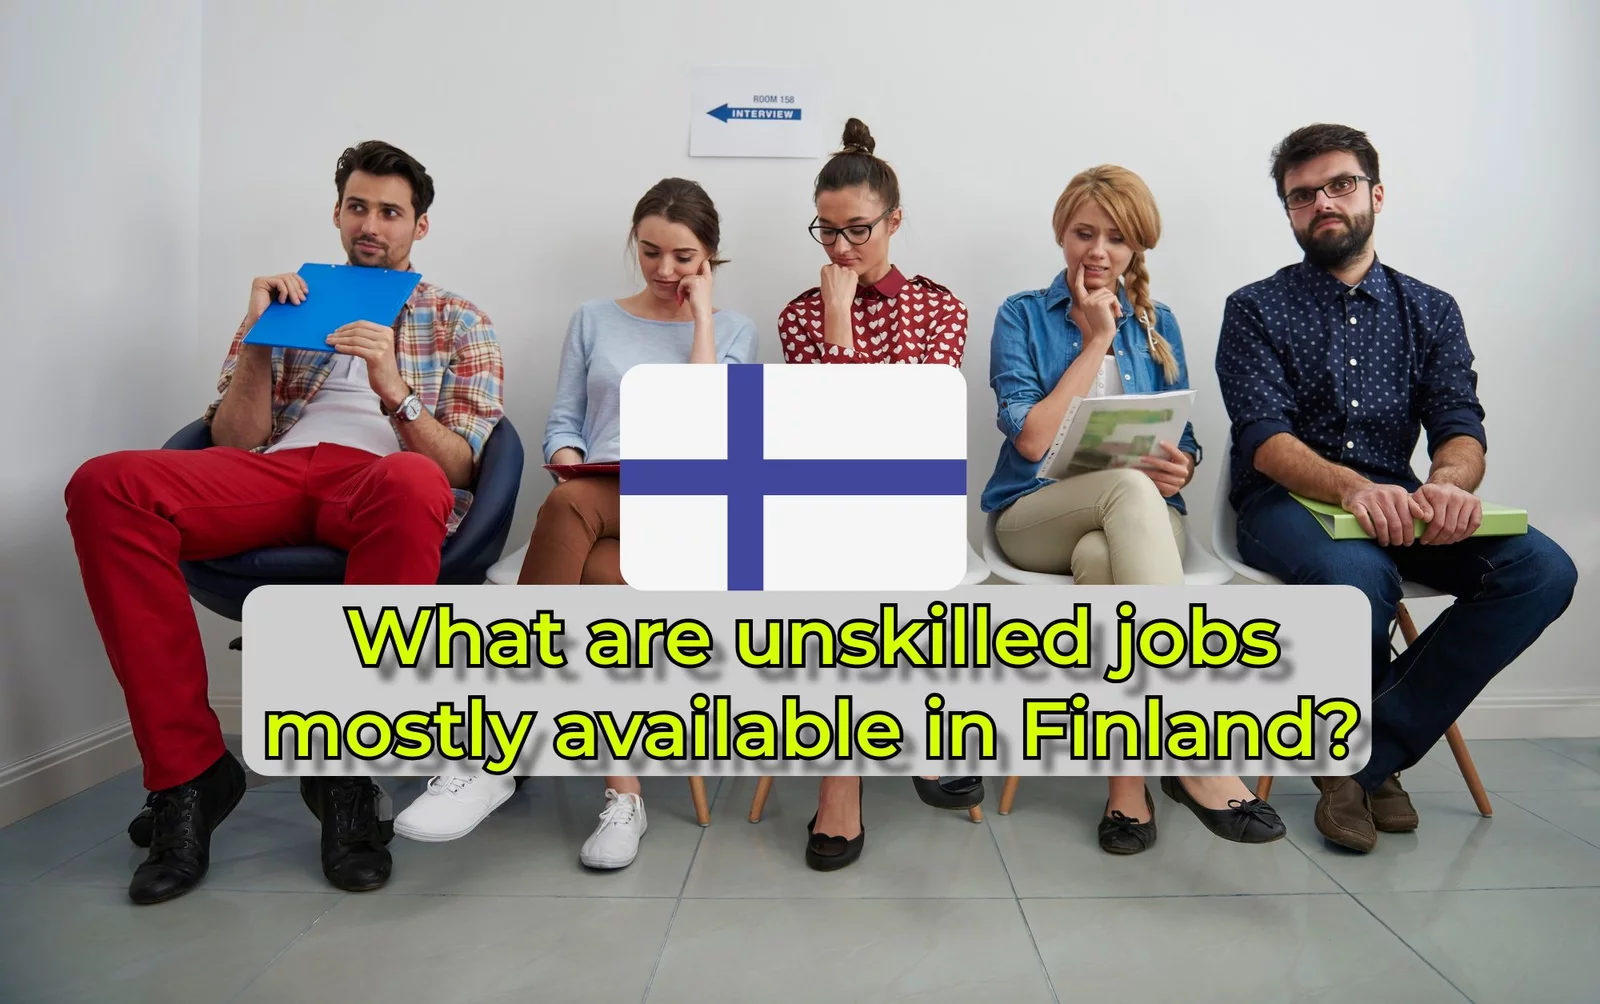 What are unskilled jobs mostly available in Finland?